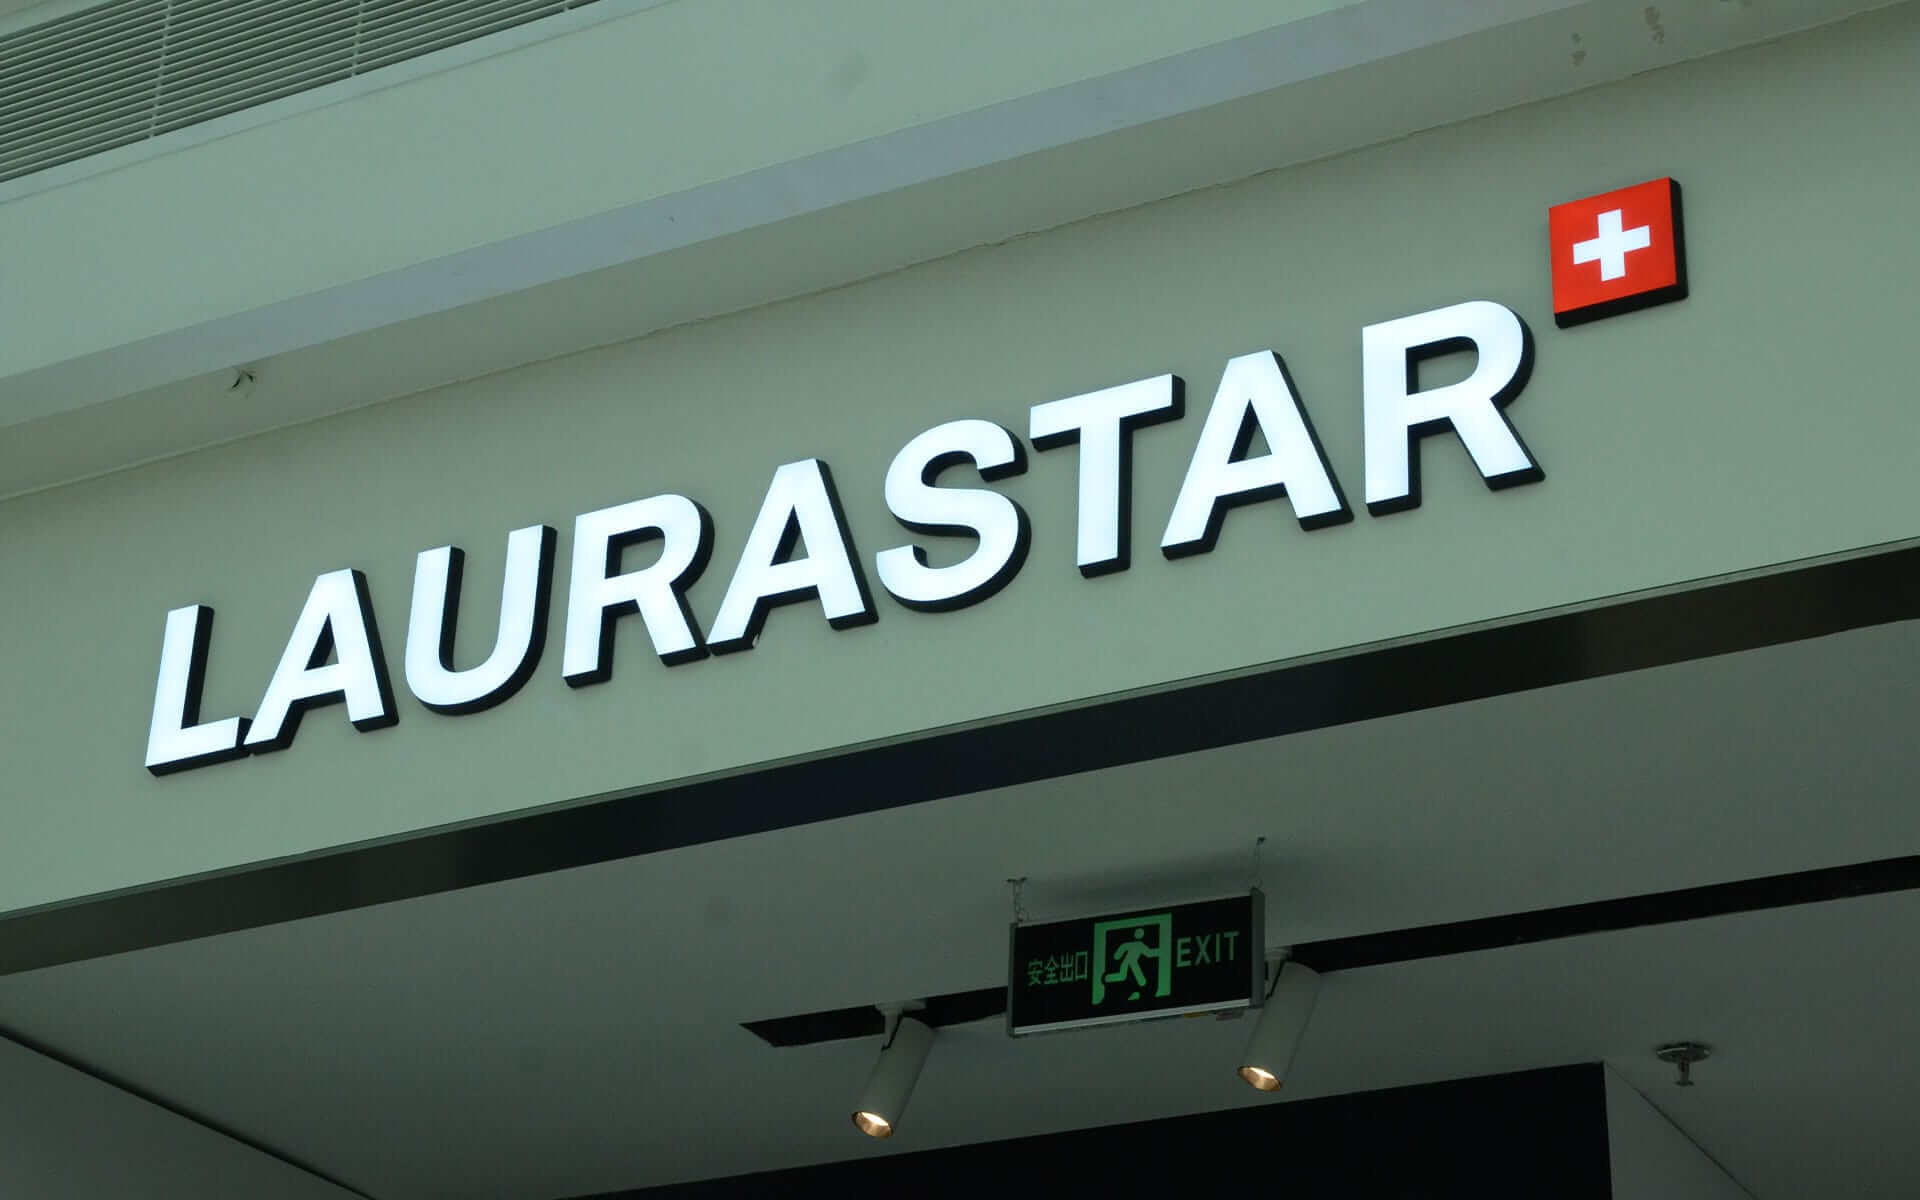 Face-lit Acrylic Channel Letters for Laurastar